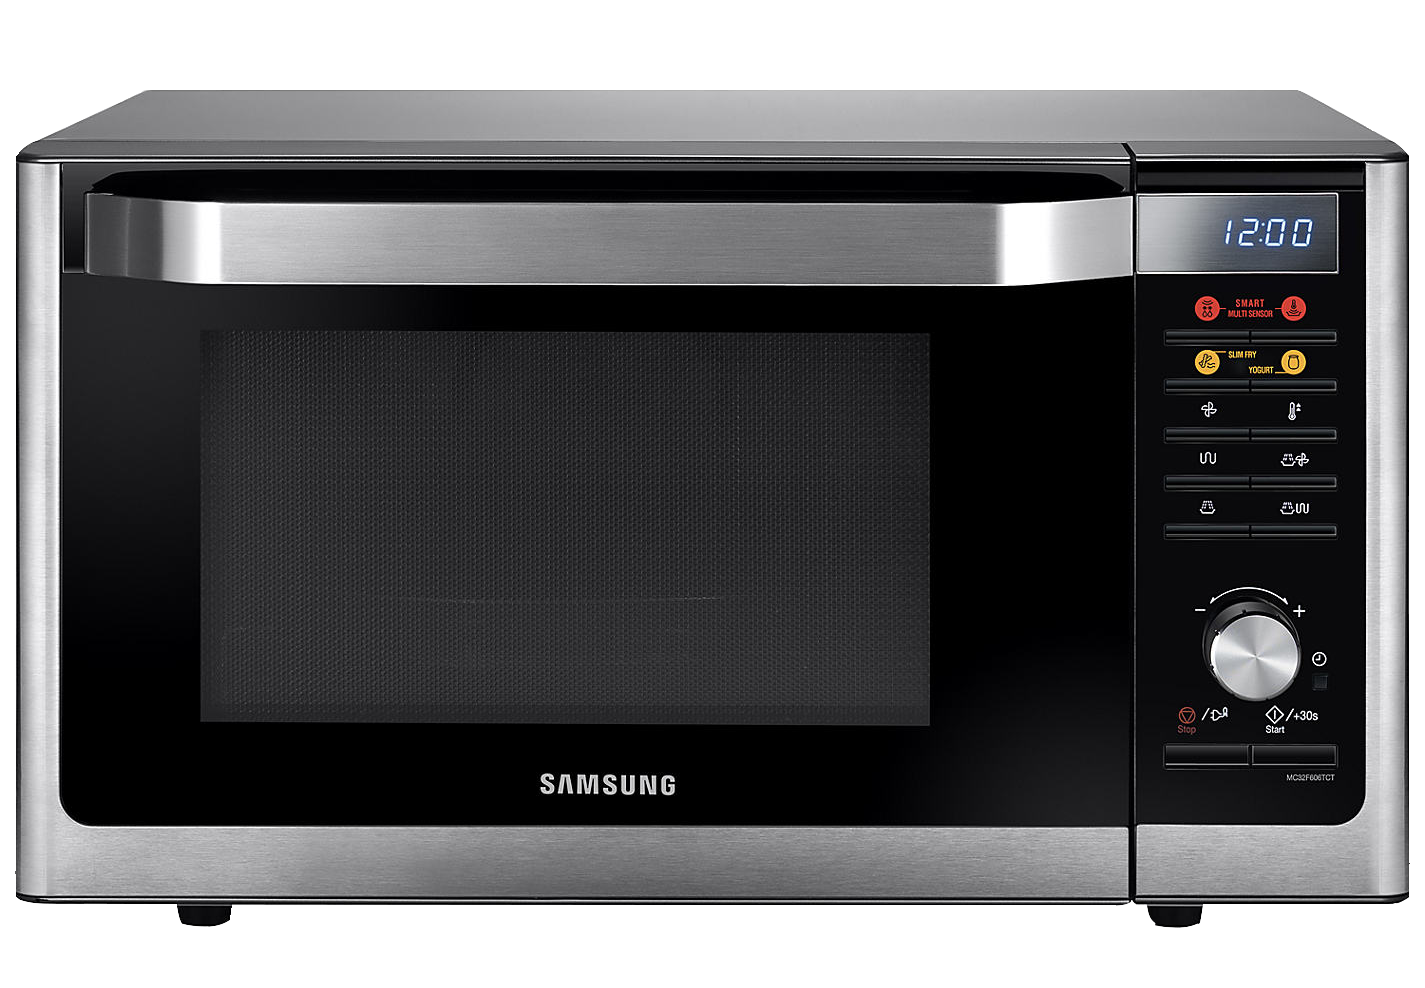 Samsung Microwave Oven Free PNG Image